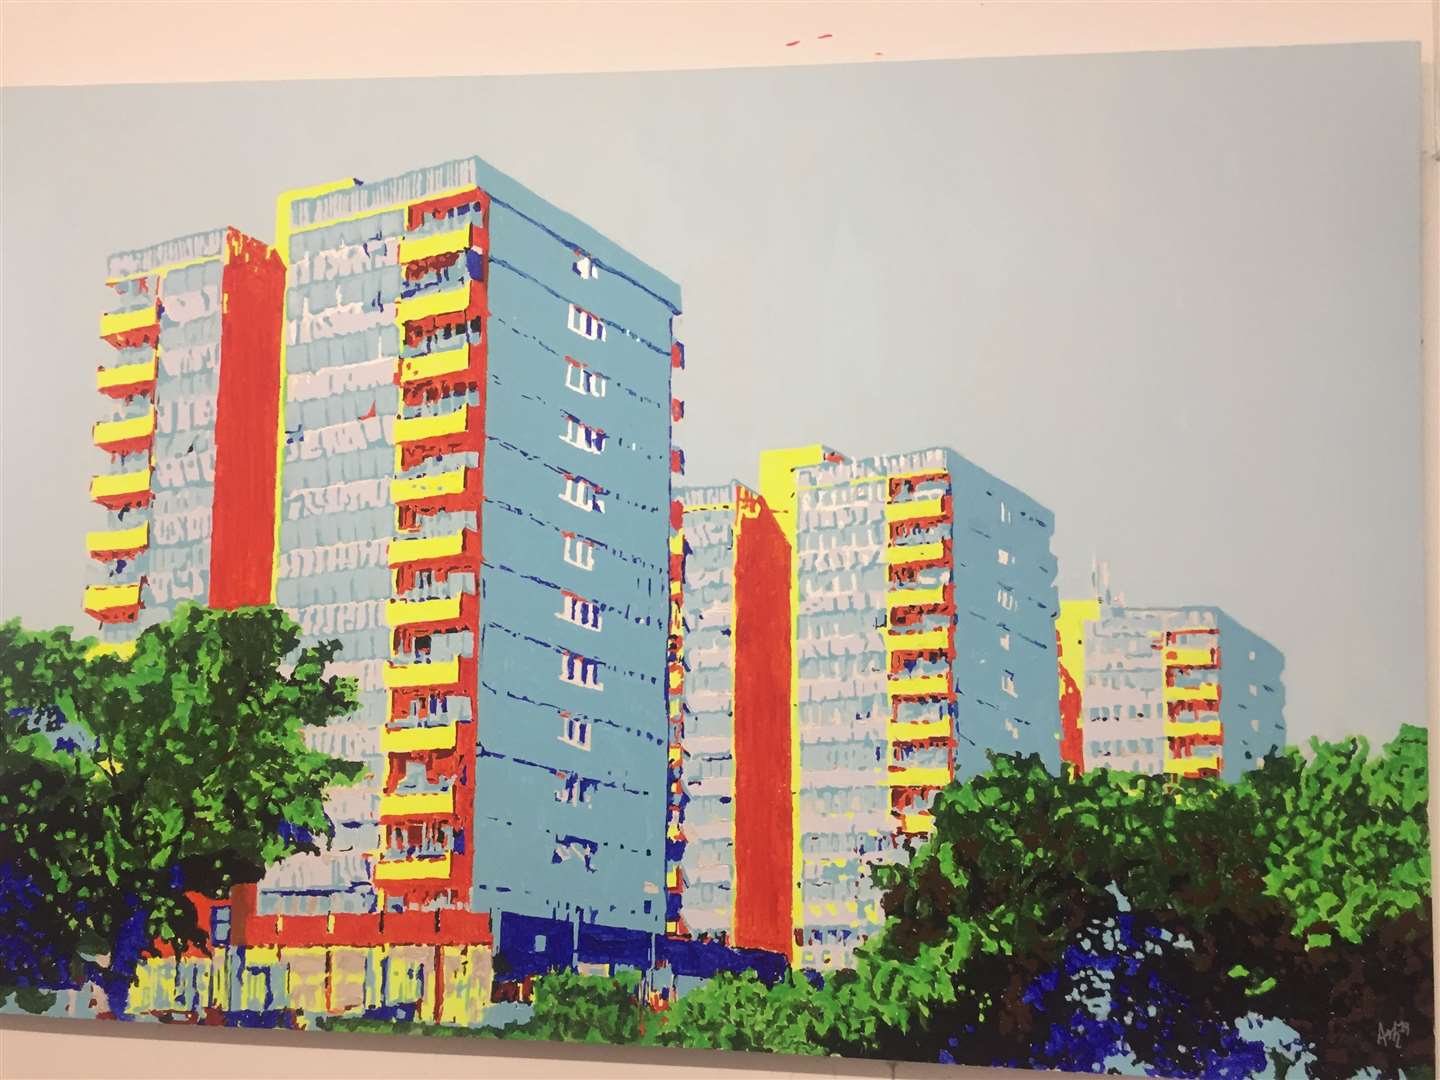 Johnathan looks locally for inspiration - here's he illustrates the three tower blocks in Bryant Street, Chatham